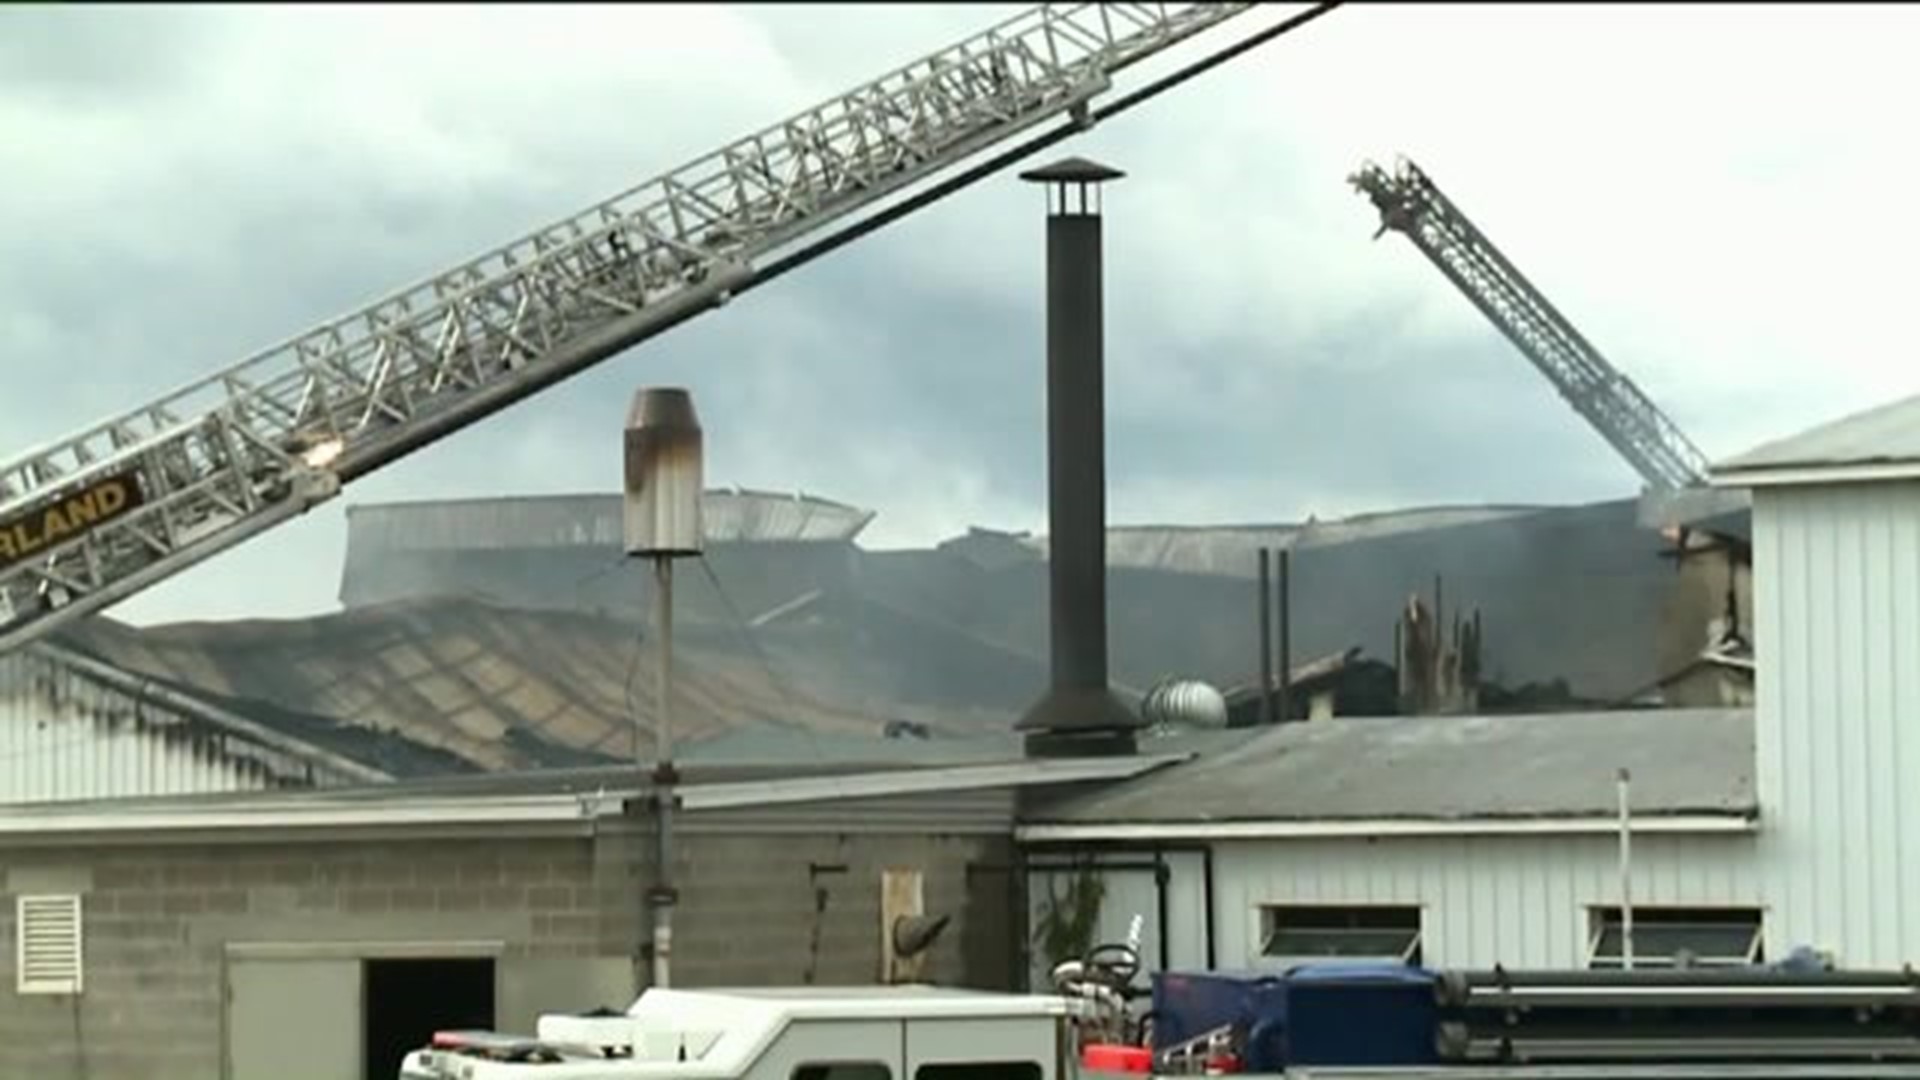 Assessing the Damage from Cheese Factory Fire